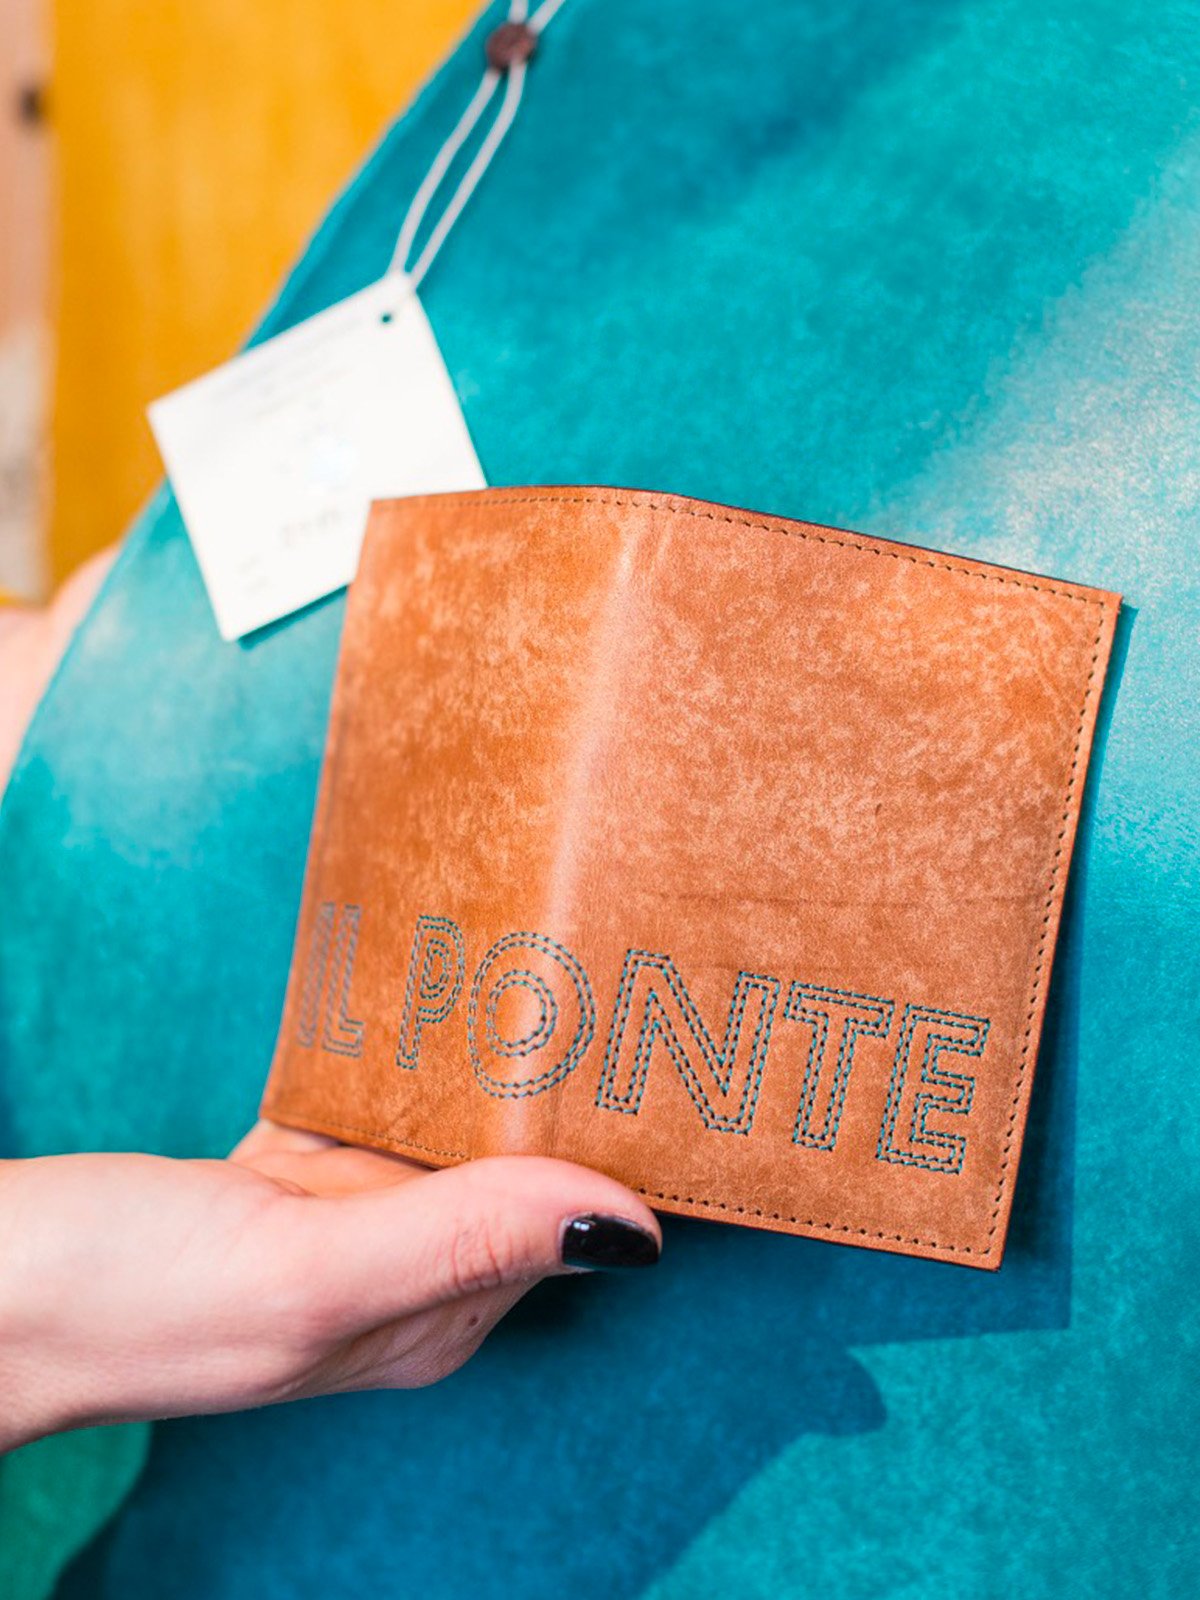 Back to naturalness: Tannery Il Ponte brings its sustainable leathers to Hong Kong